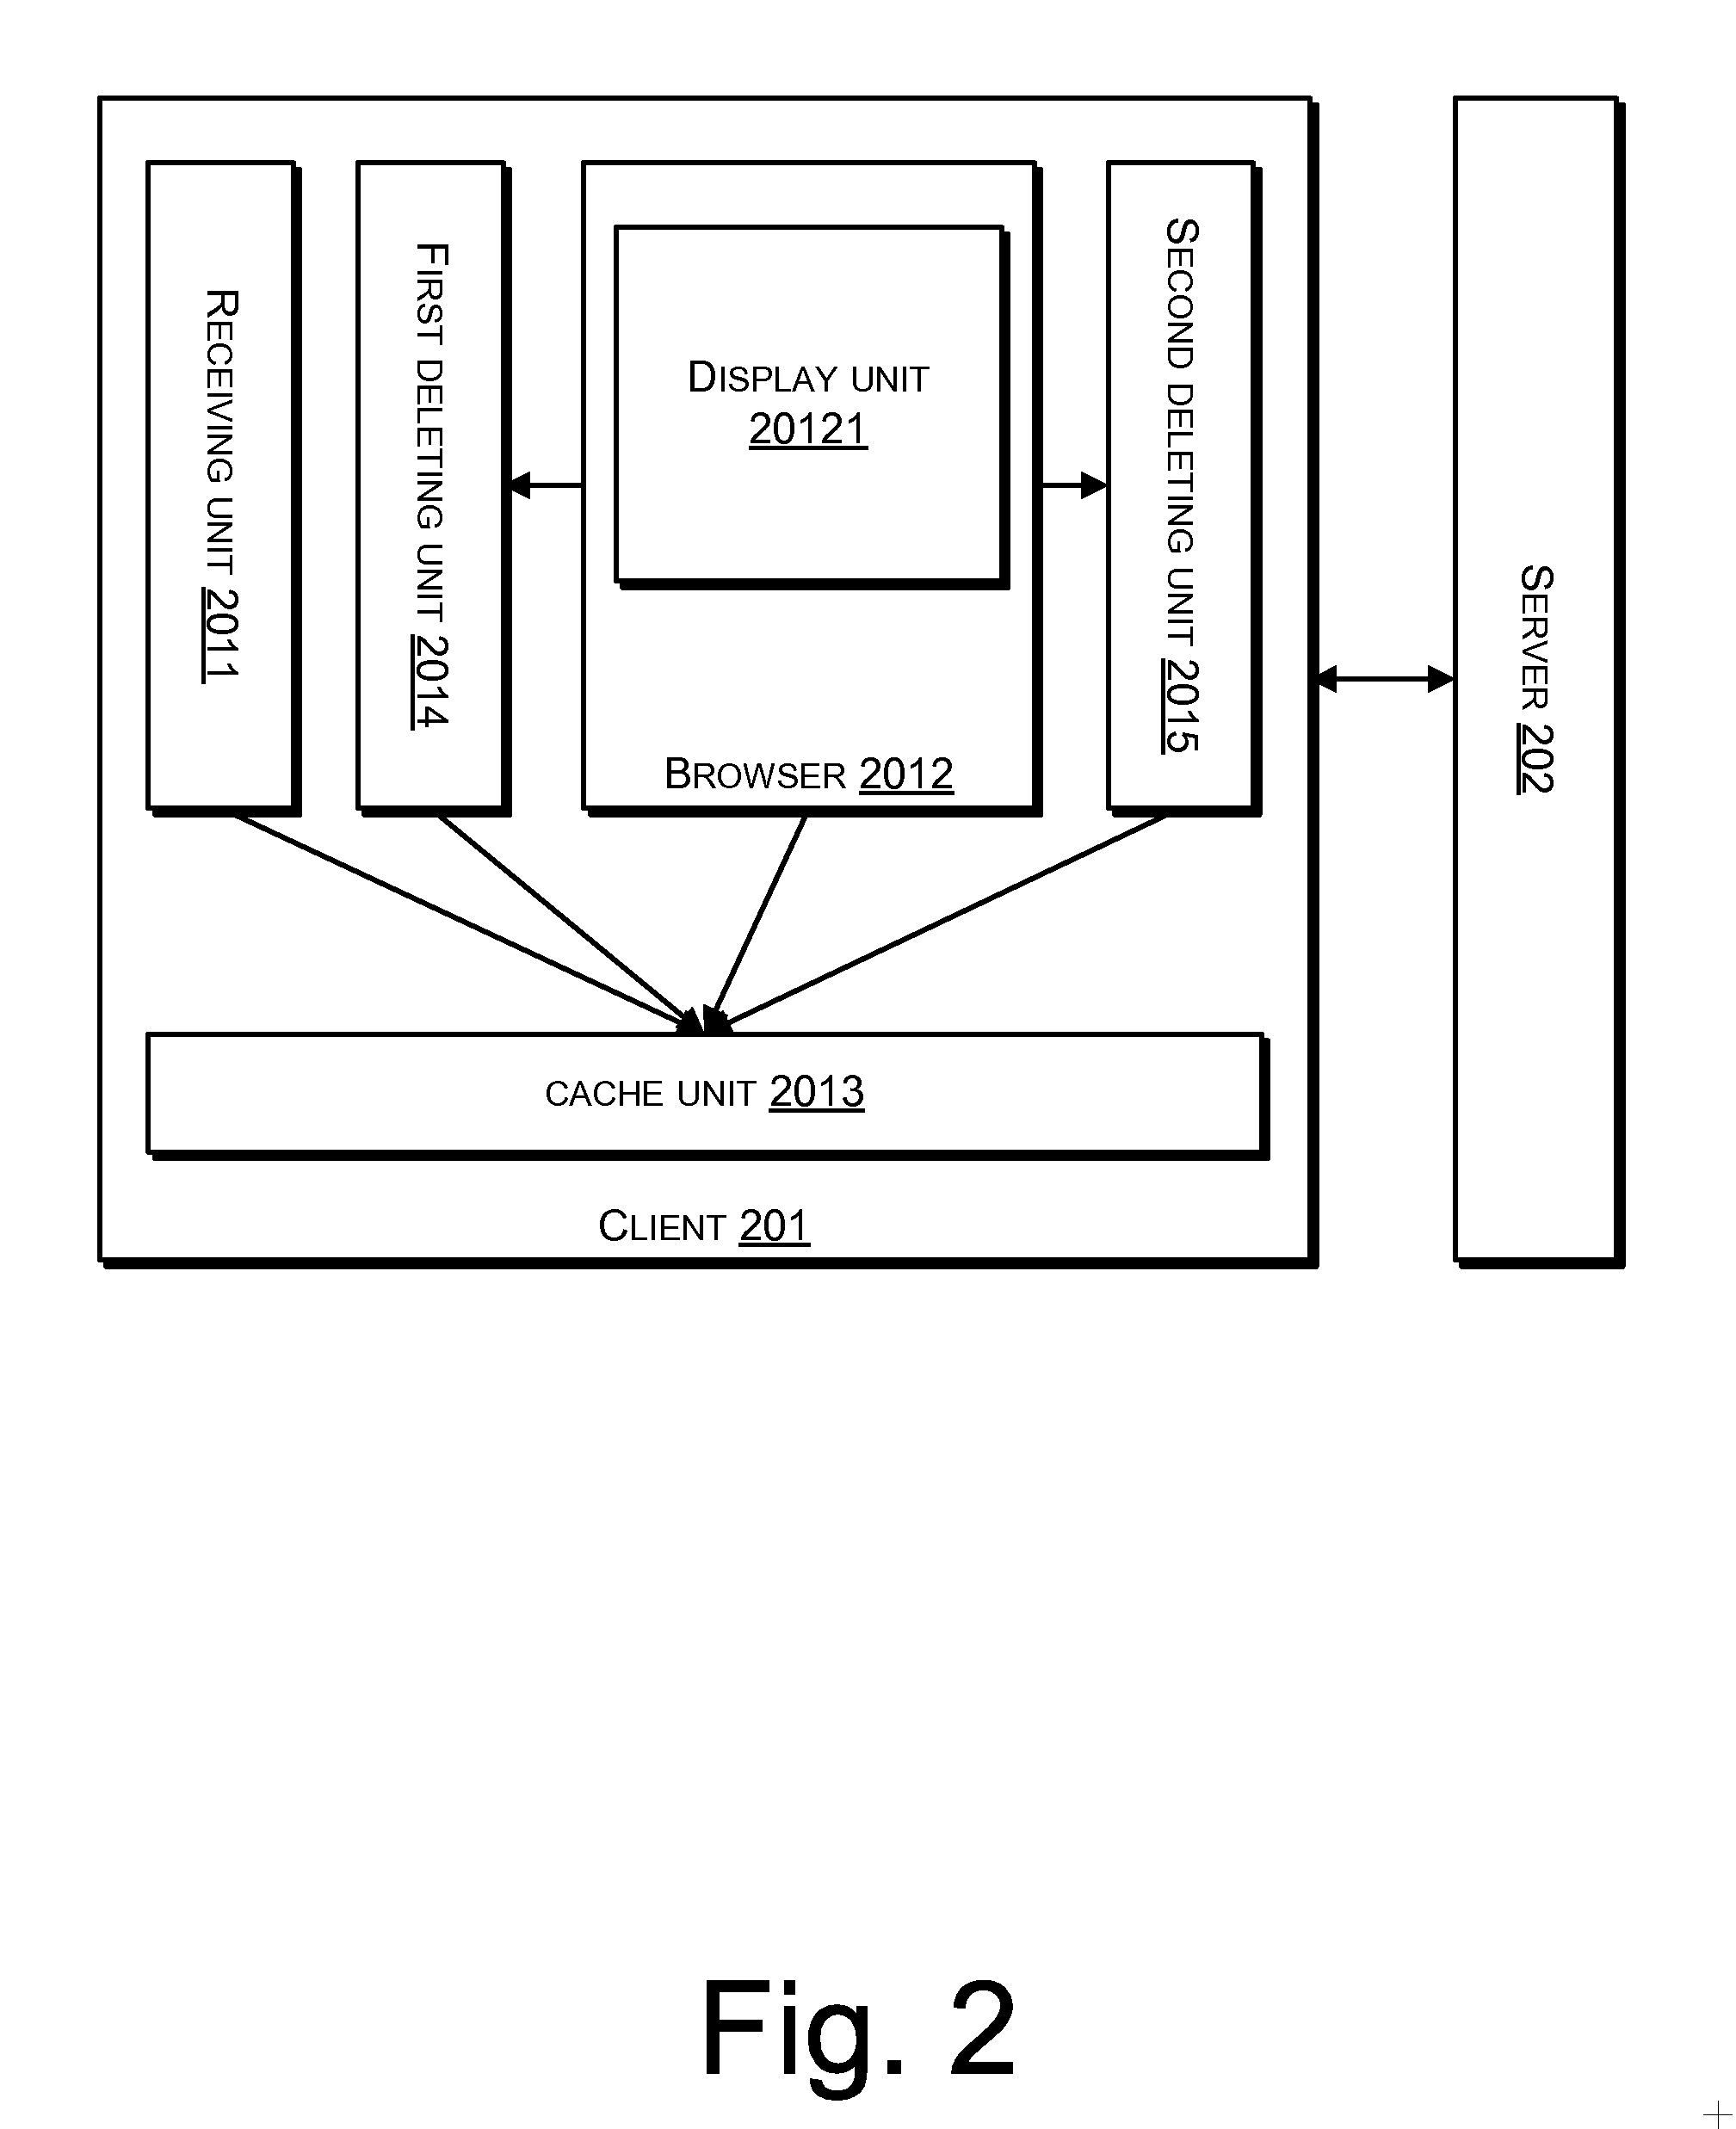 Method and System for Displaying Web Page